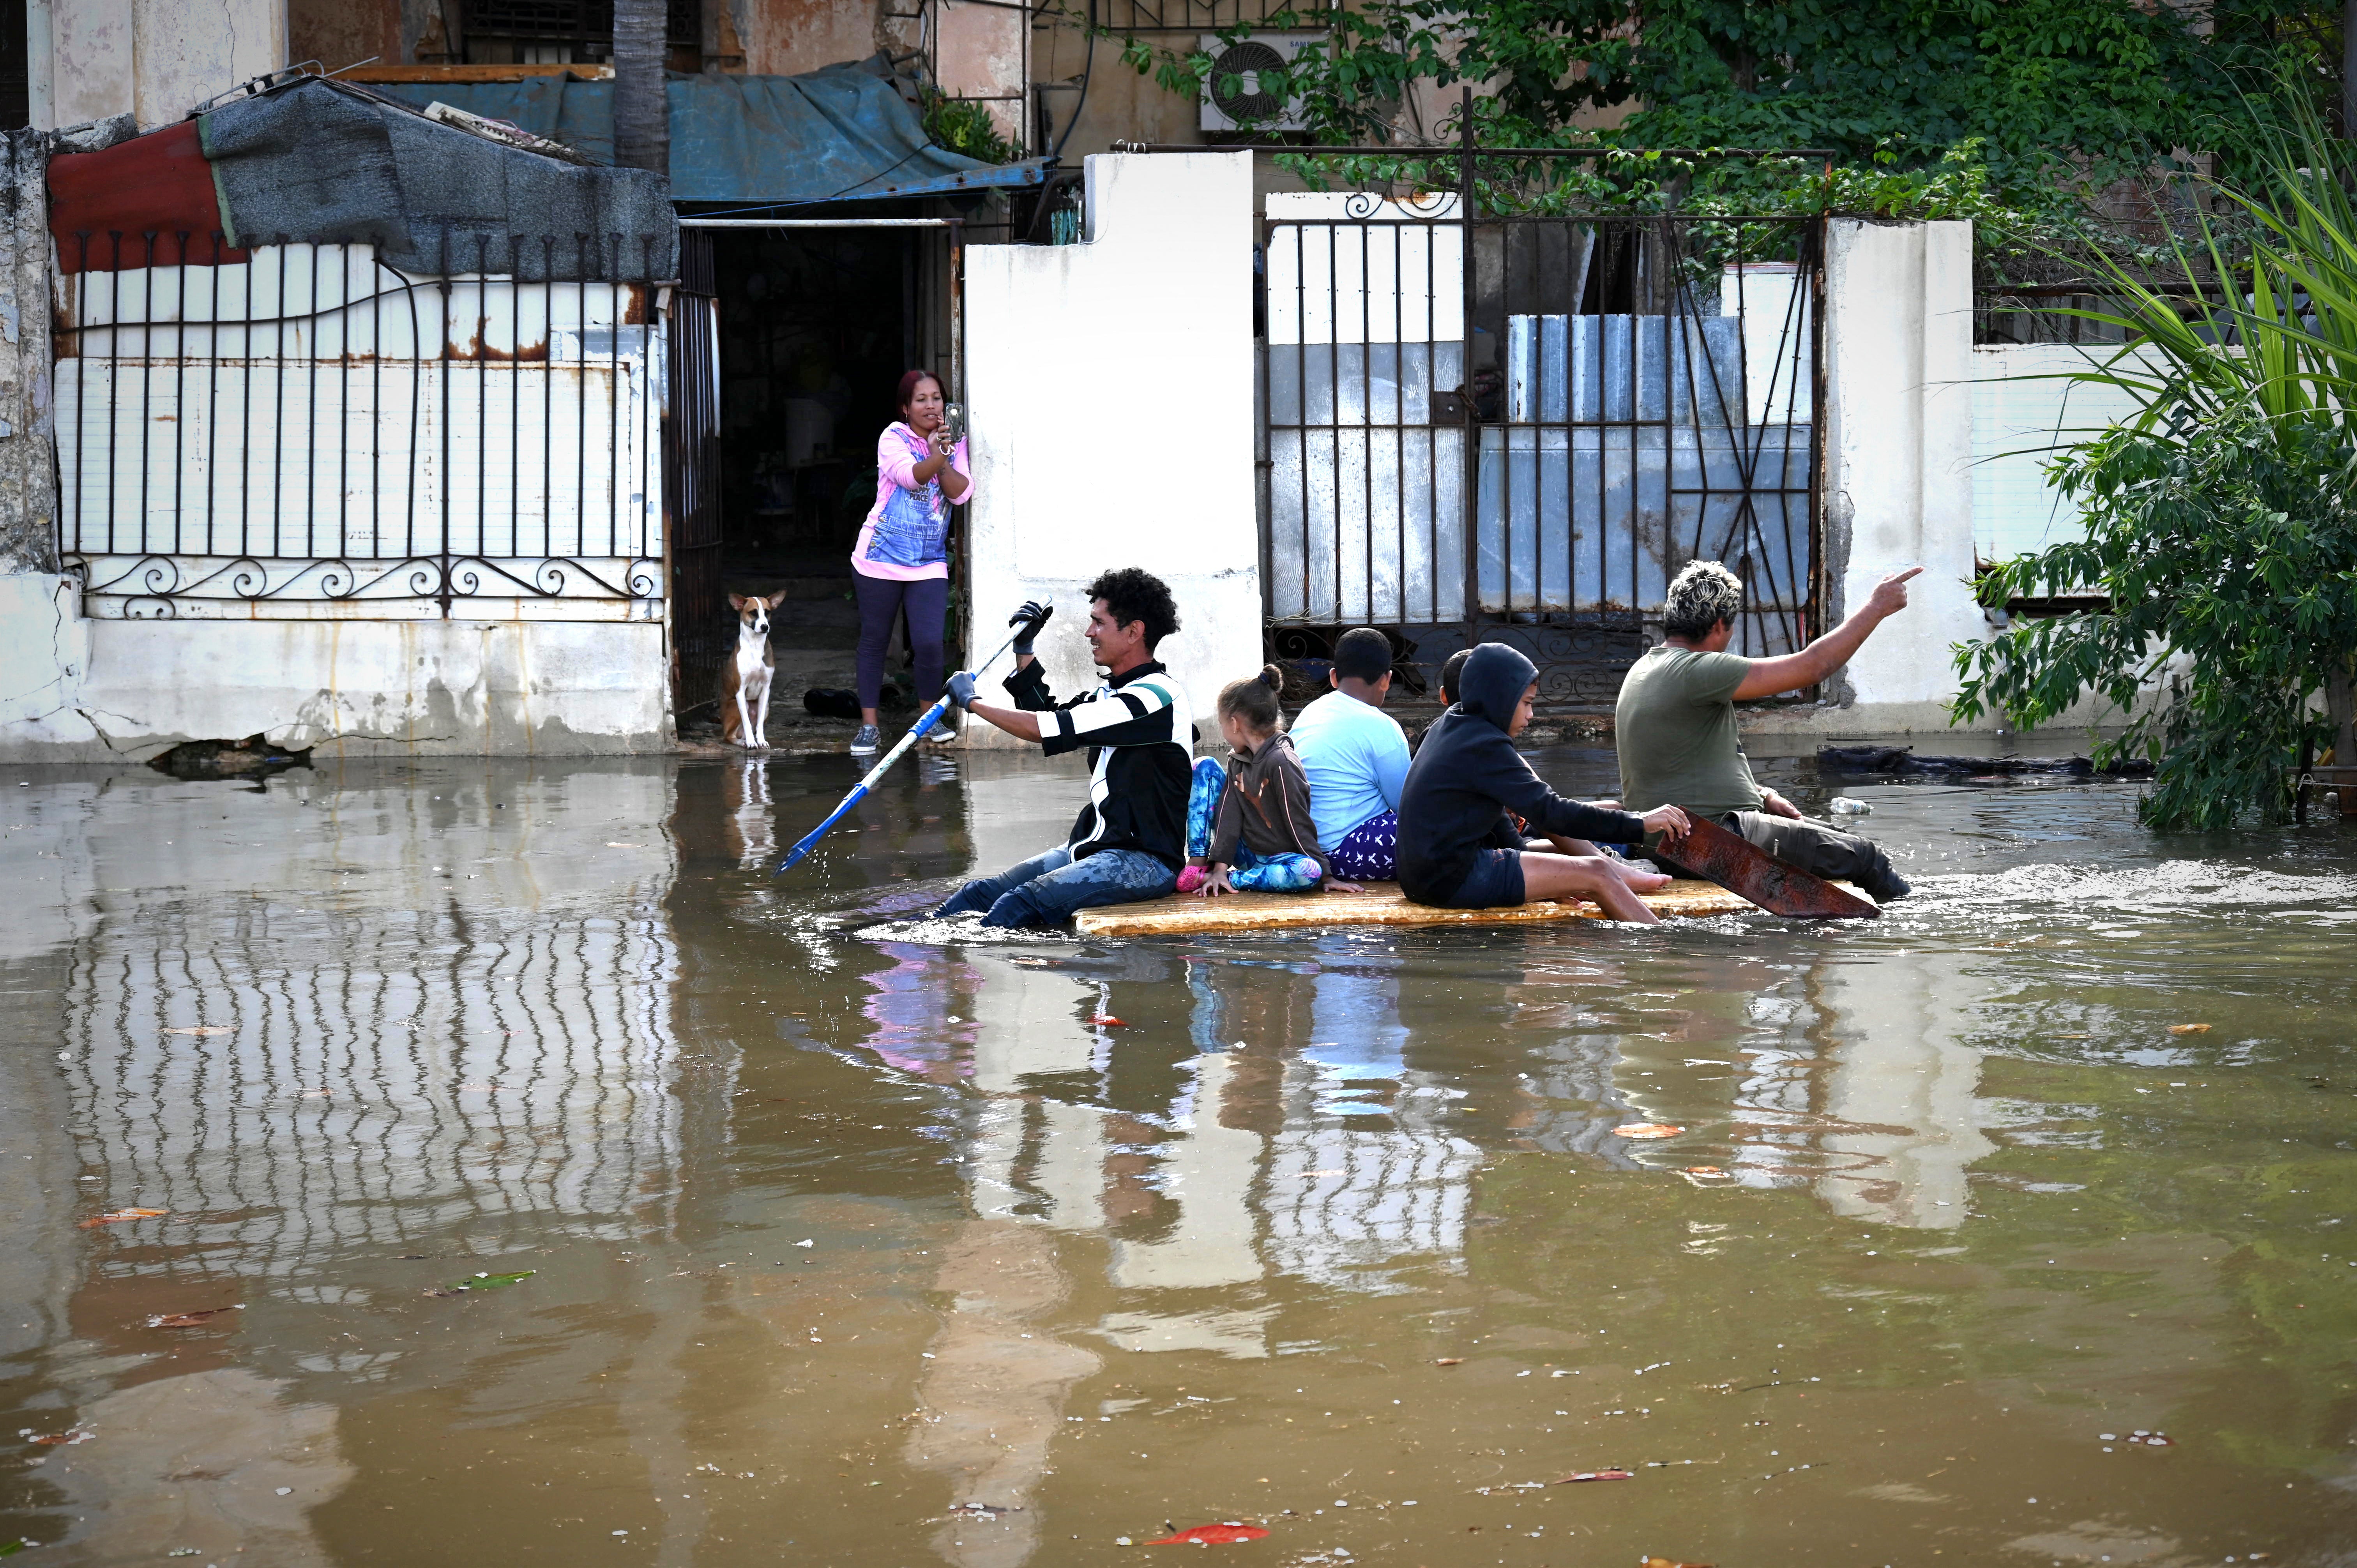 pPeople navigate through a flooded street on a rustic raft in Havana/p